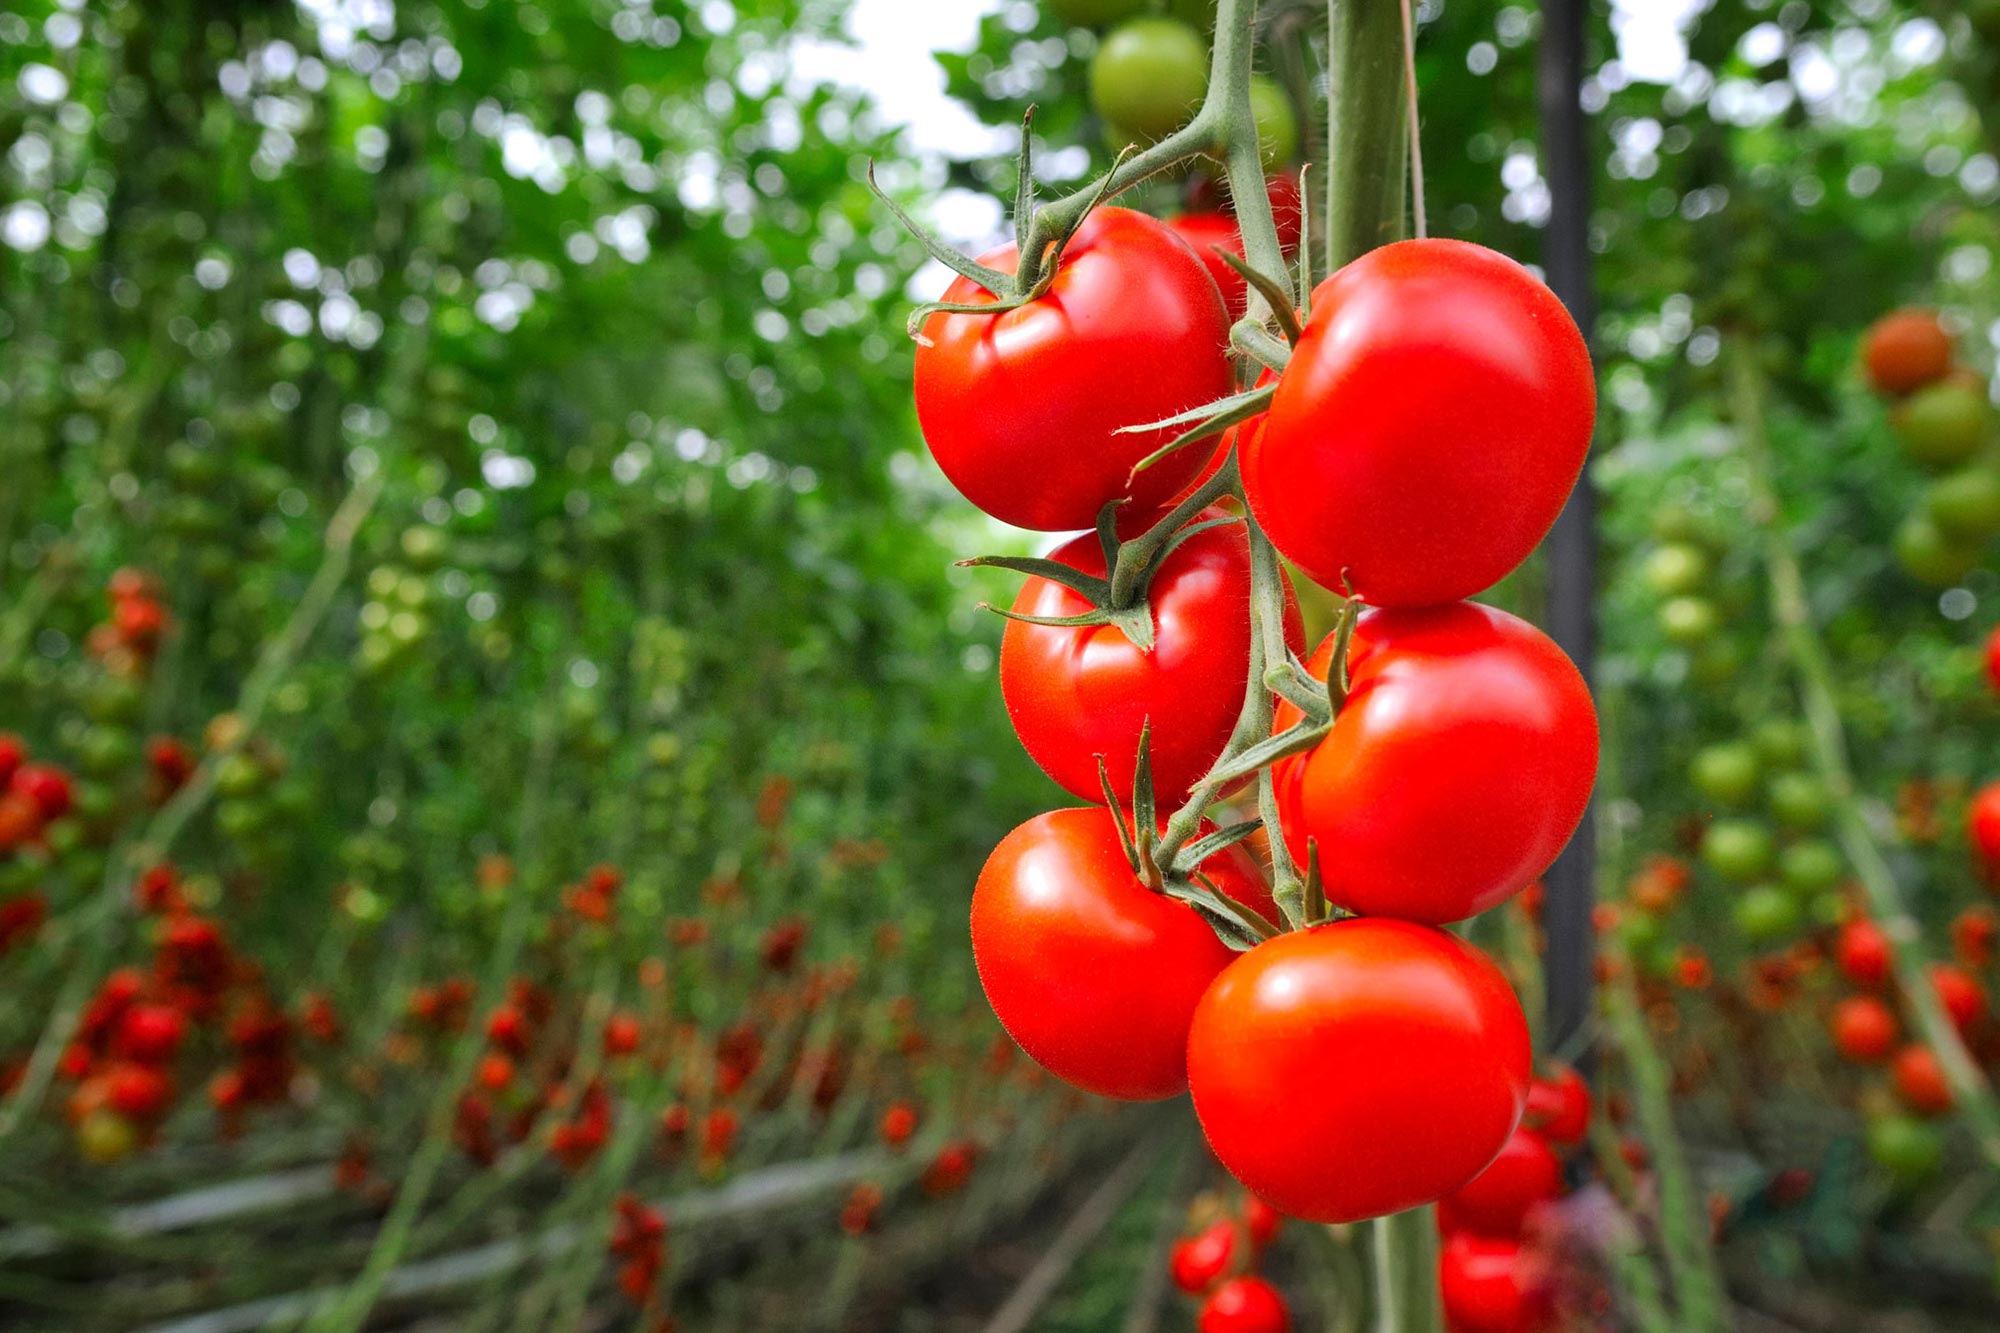 Researchers Surprised After They Graft Tomato Plants With Epigenetically-Modified Rootstock - SciTechDaily